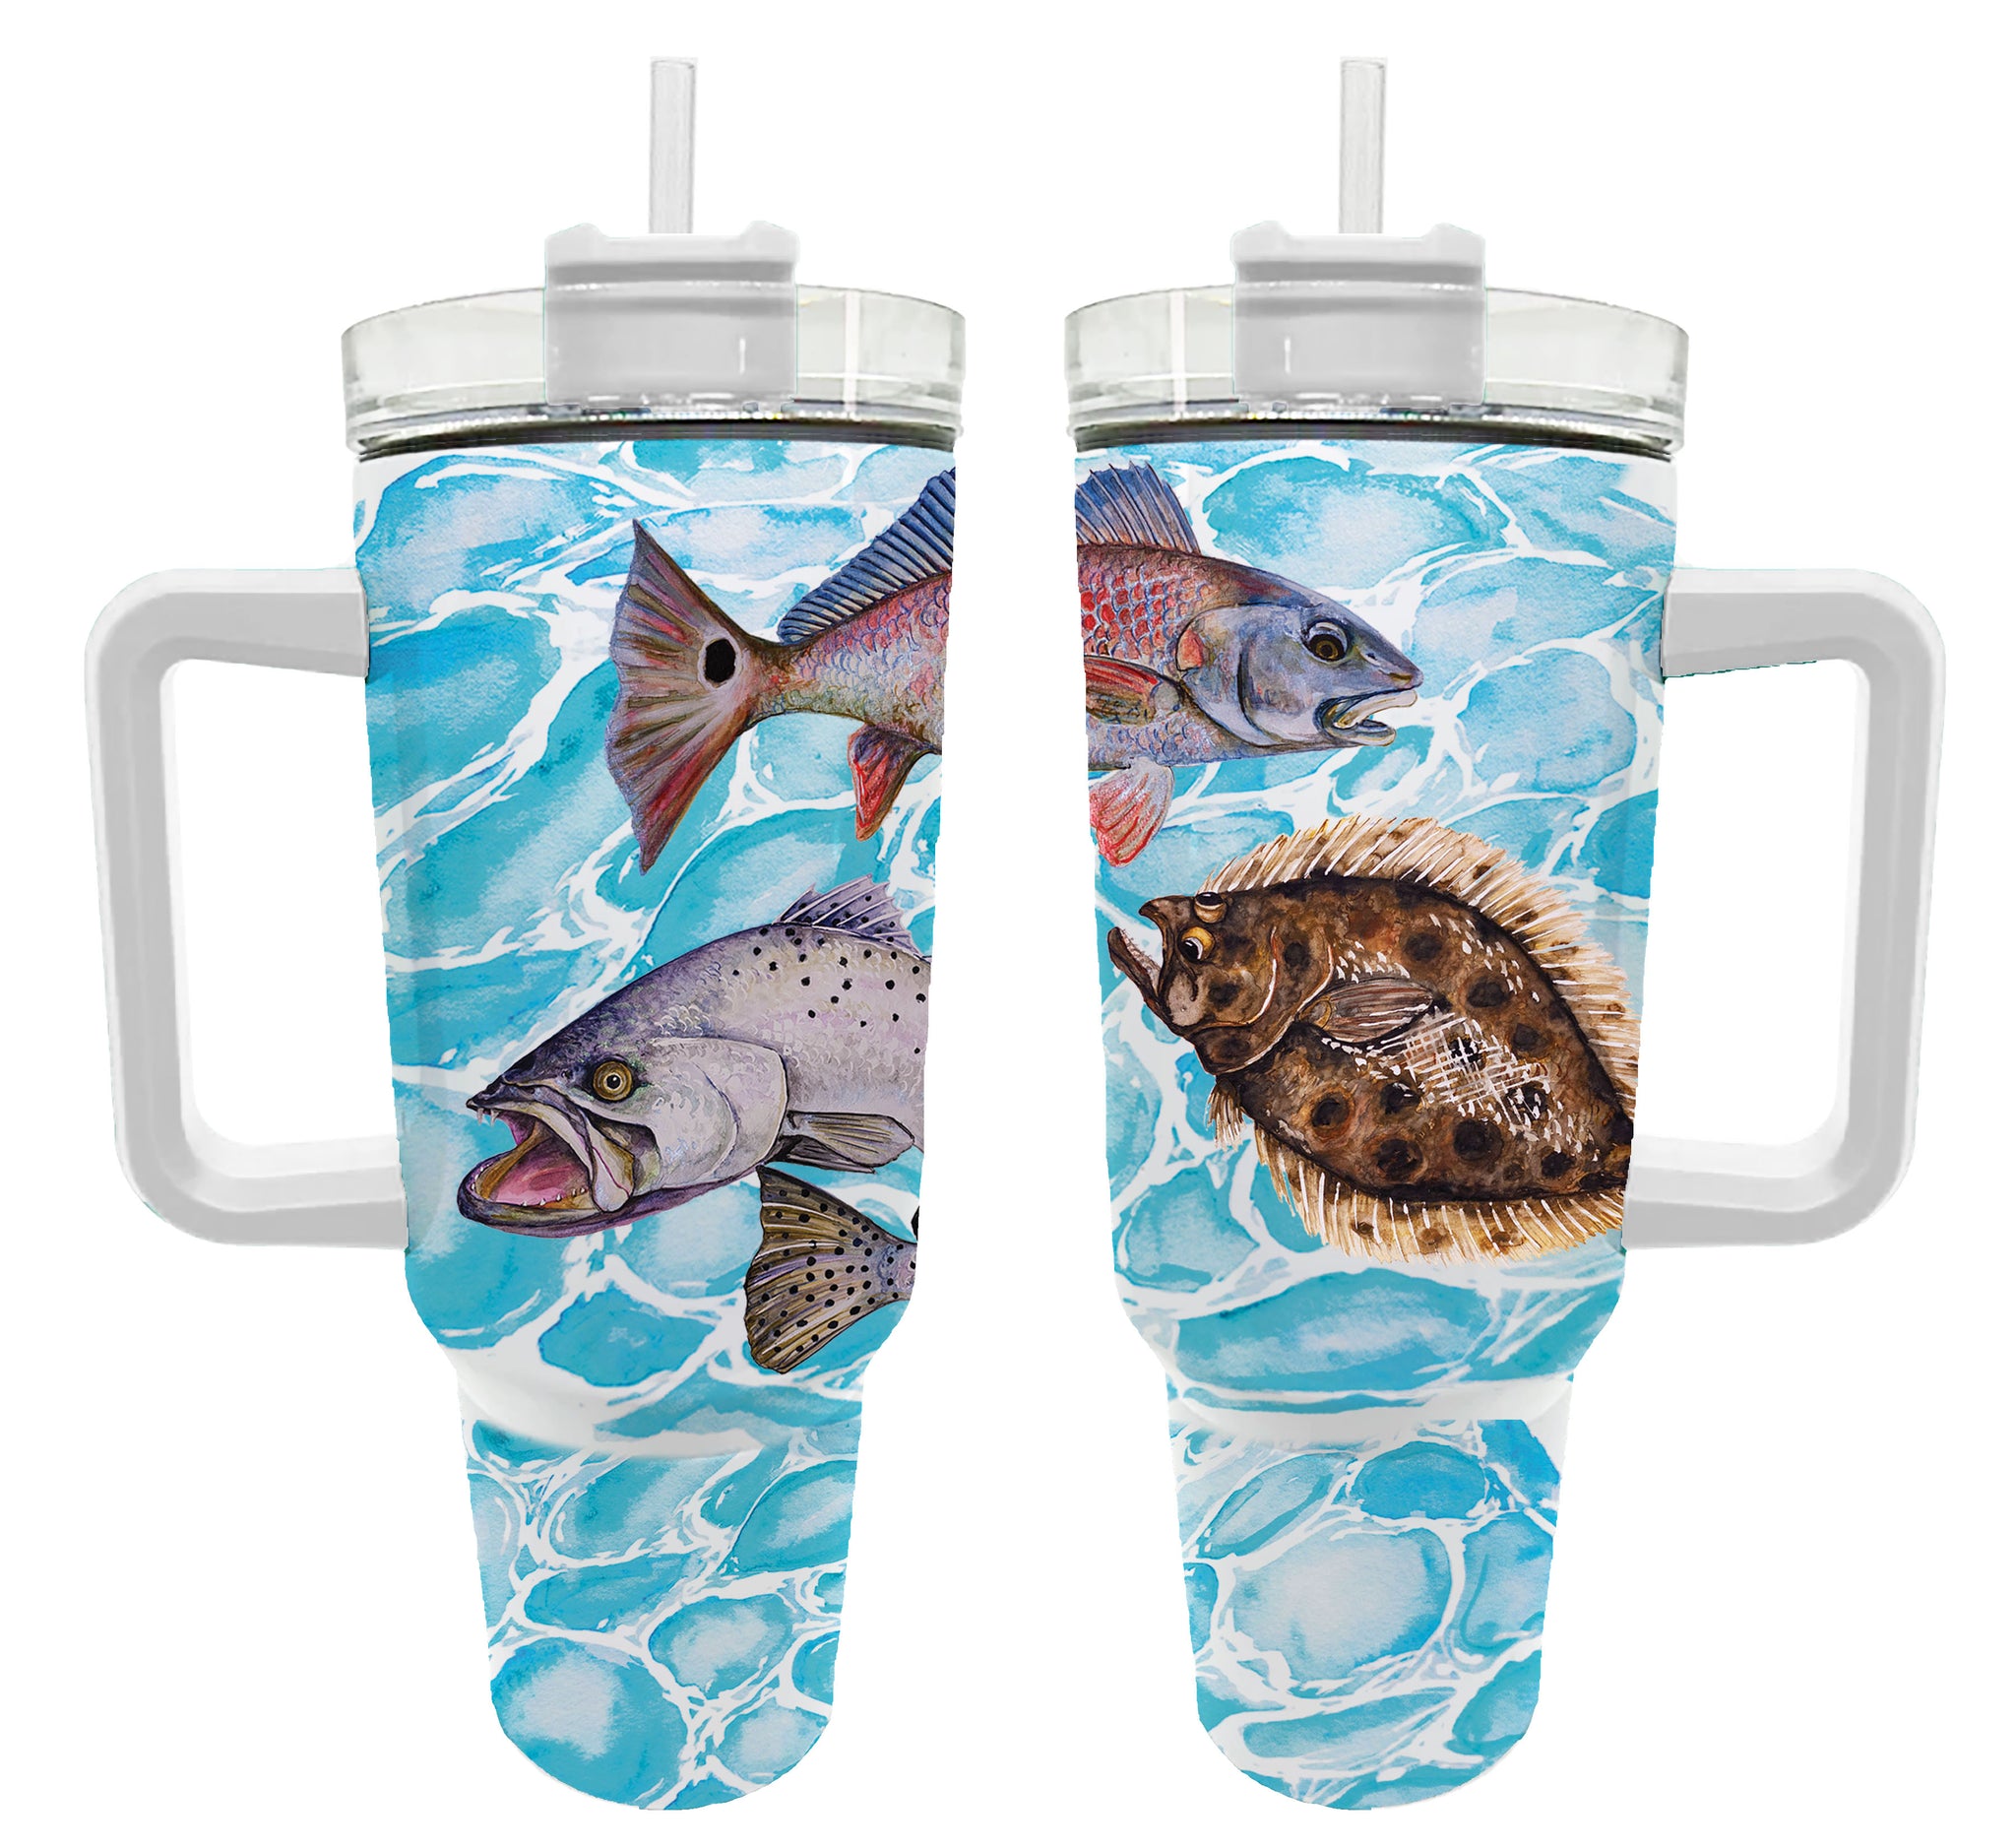 40oz- Fish tumbler to benefit Hawaii disaster relief!